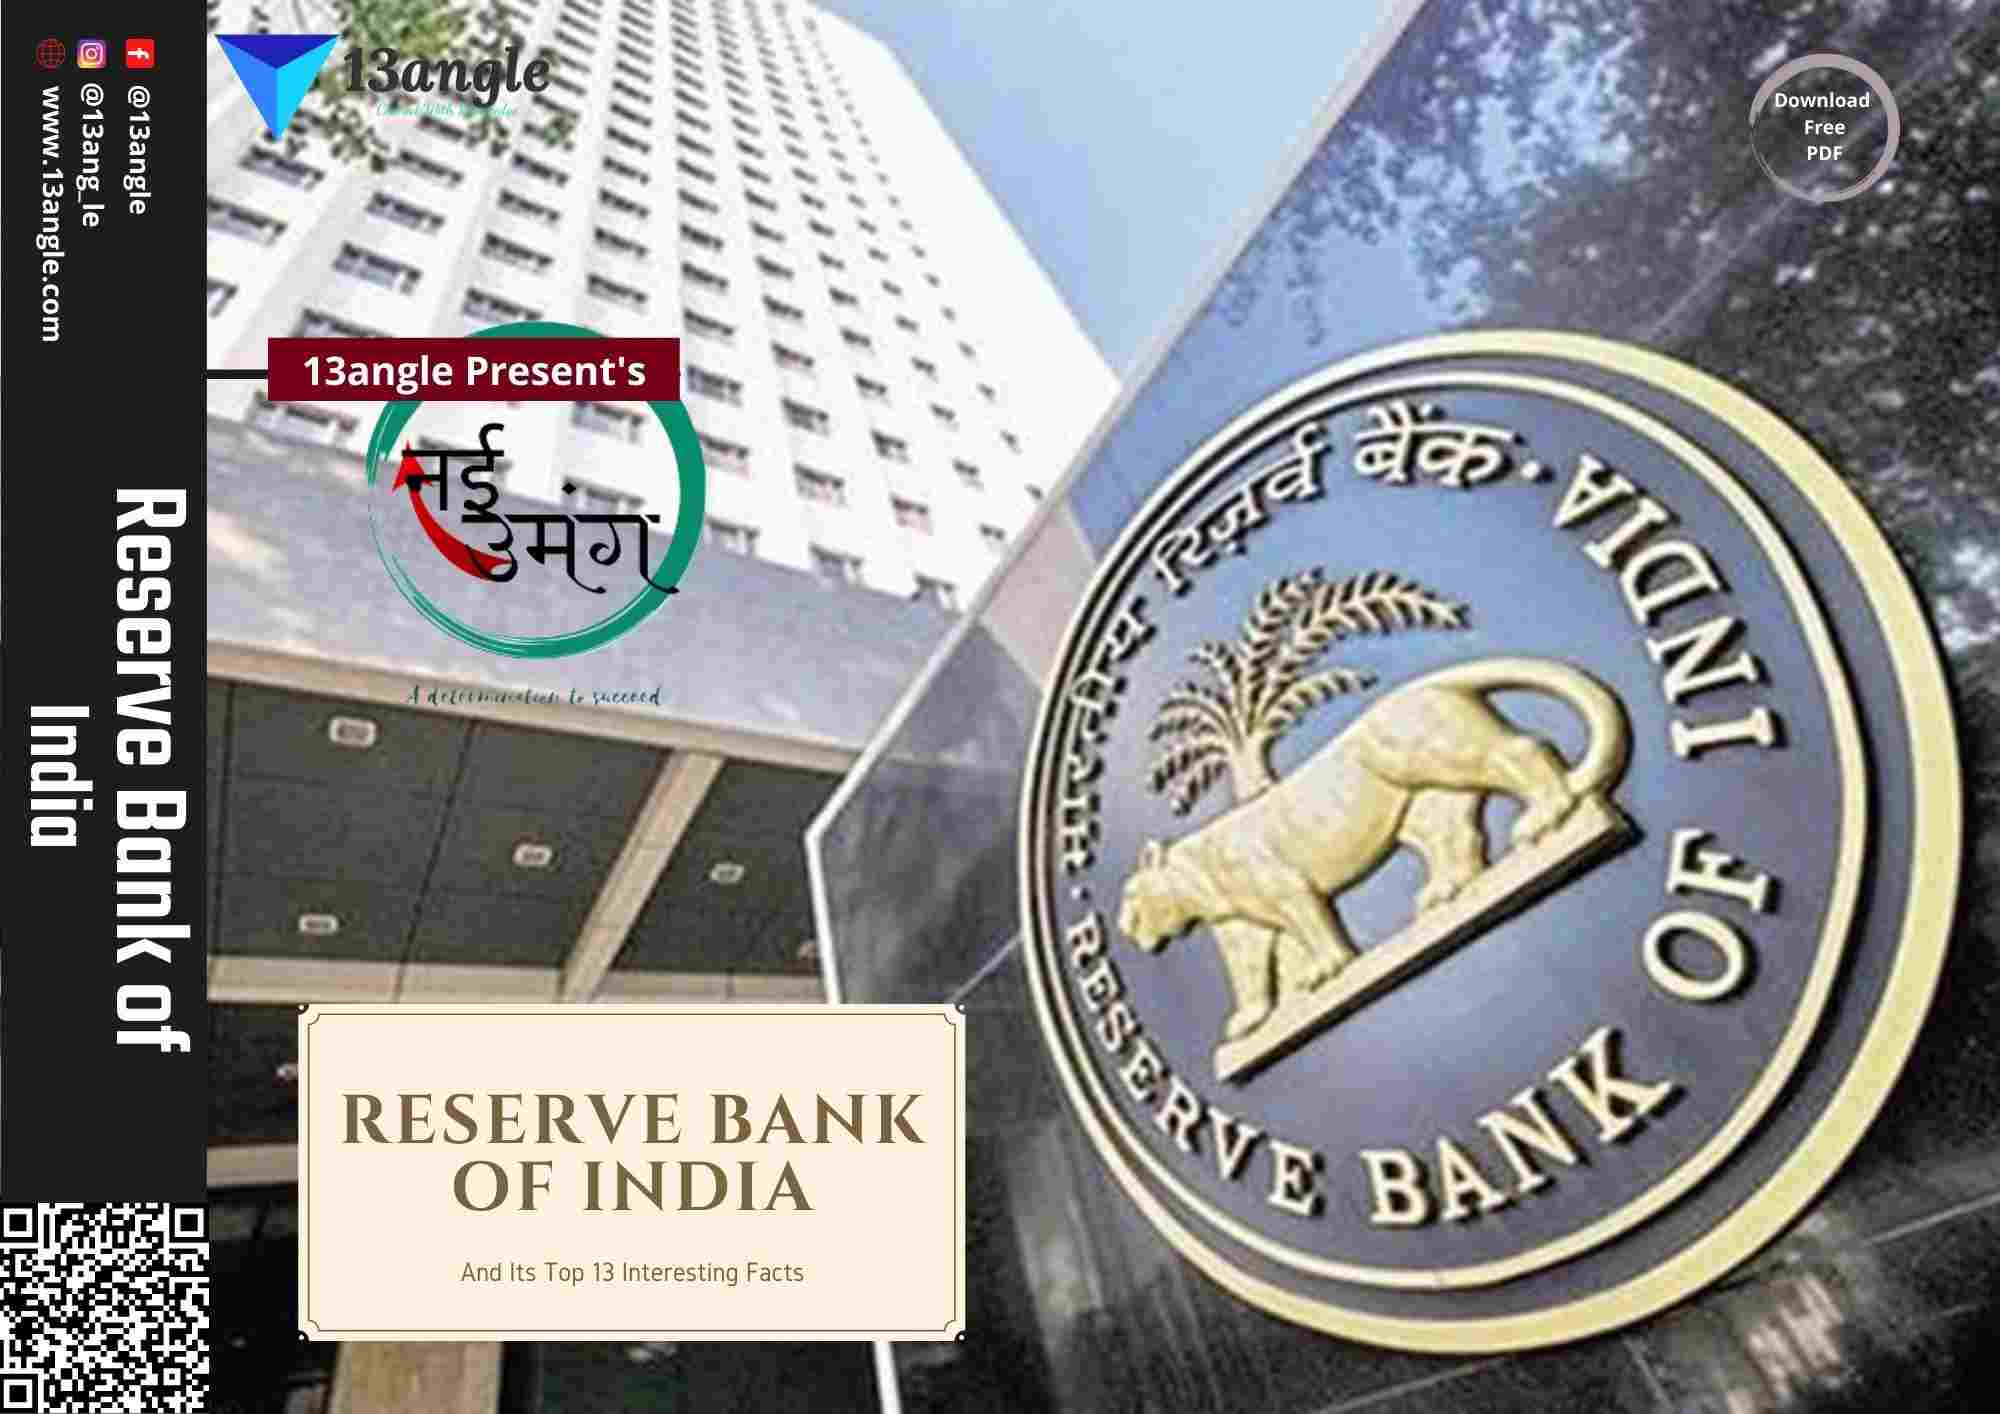 RBI and its top 13 interesting facts- 13angle.com